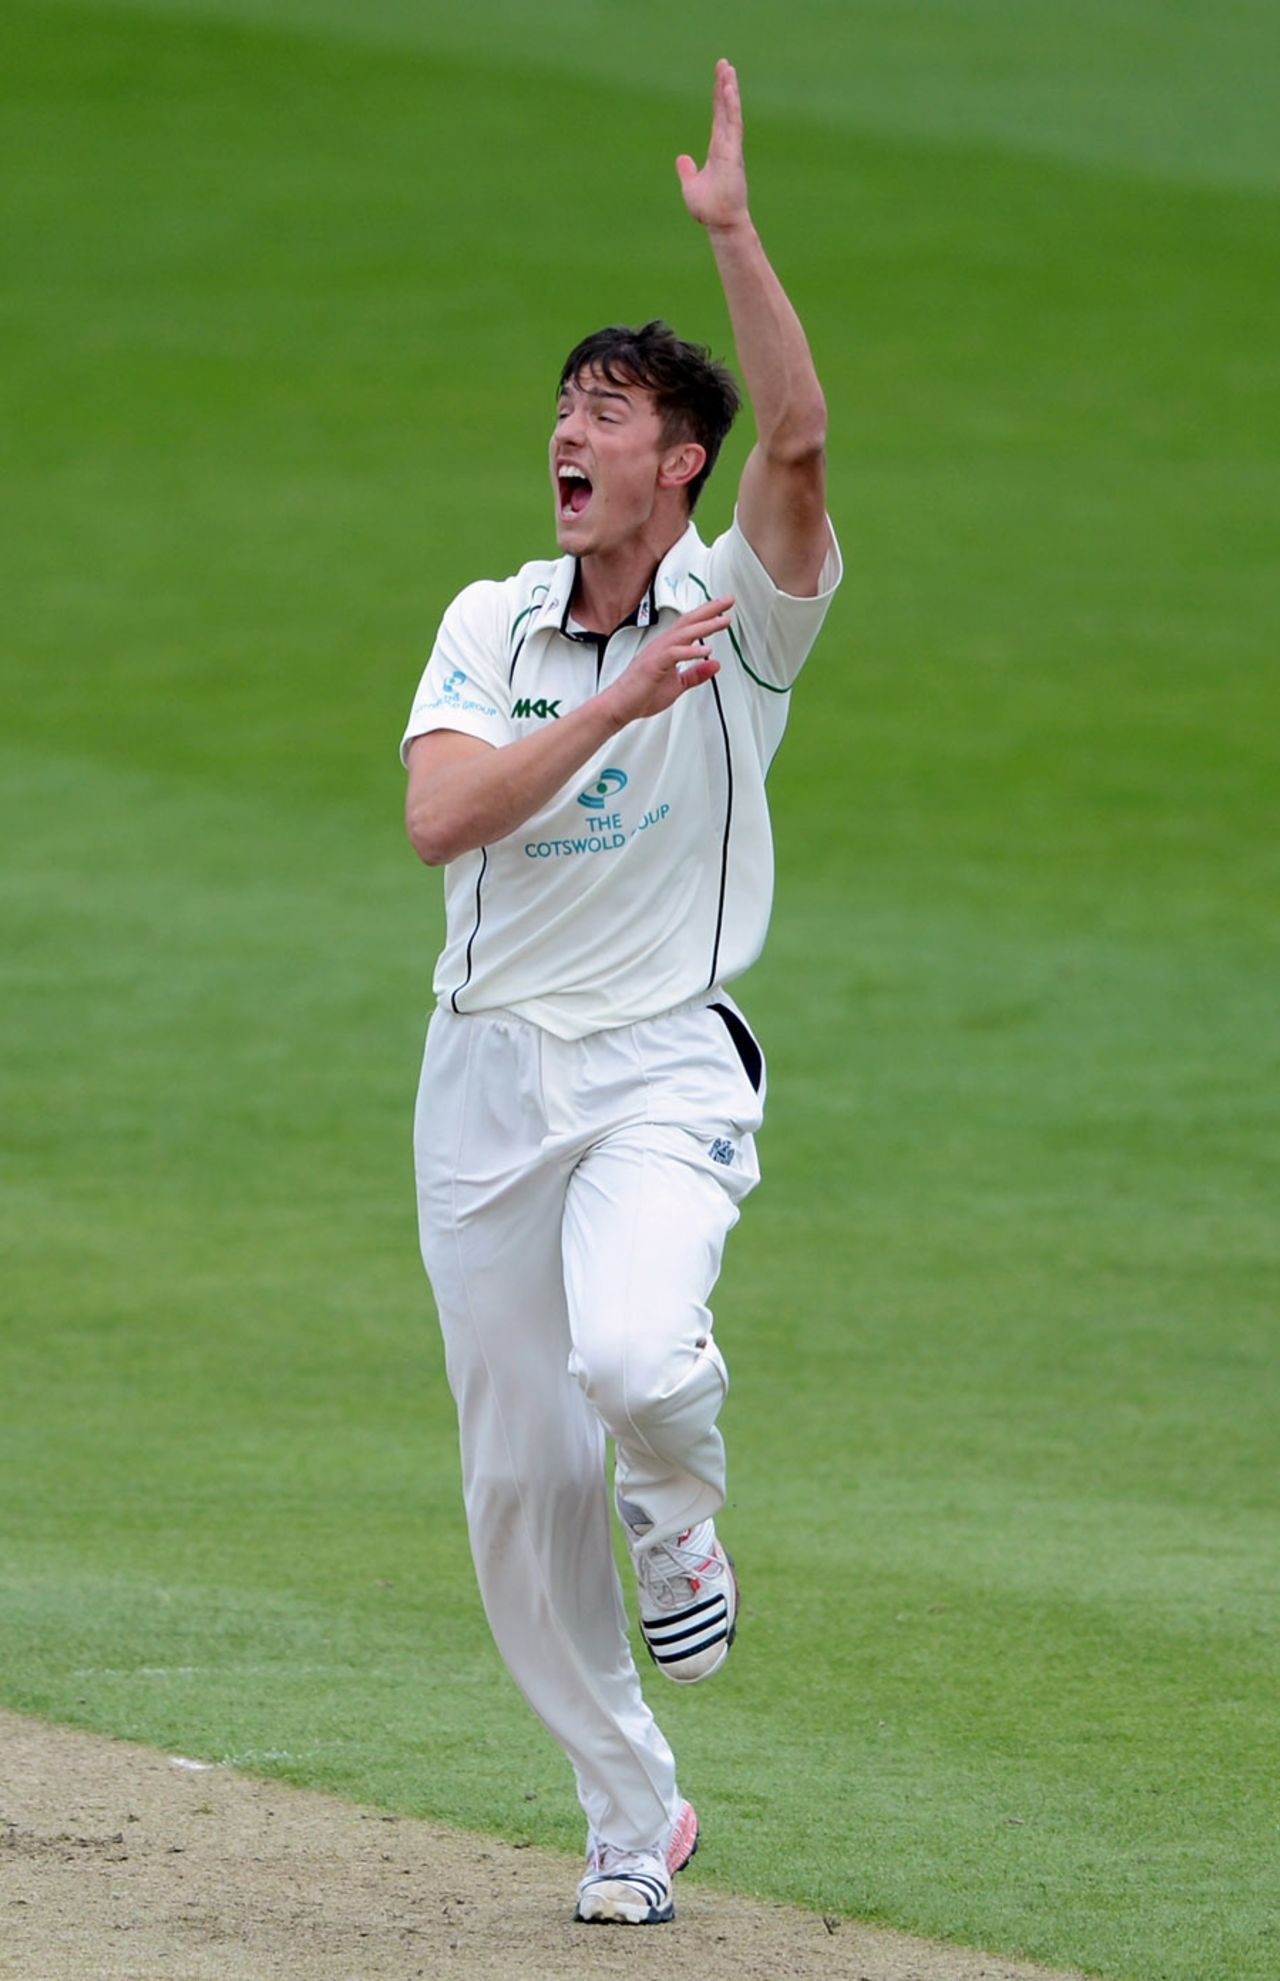 Richard Jones took four wickets as Surrey were forced to follow on, Worcestershire v Surrey, County Championship, Division One, 3rd day, New Road, May 11, 2012